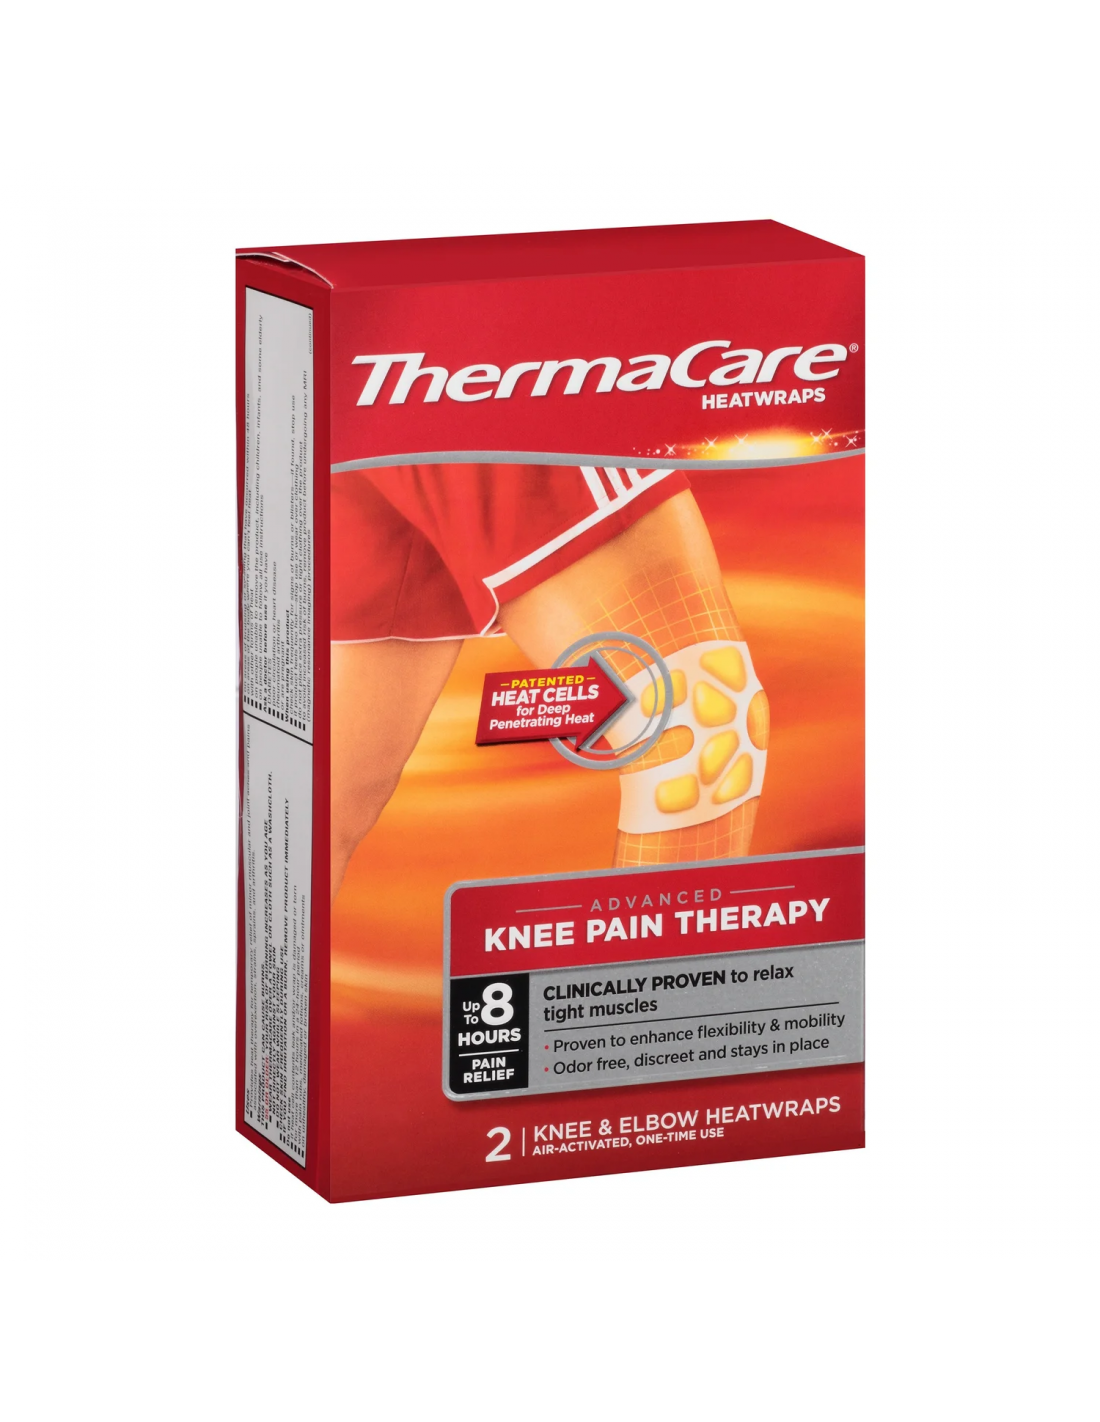 thermacare cuello/hombro 2 parches term.